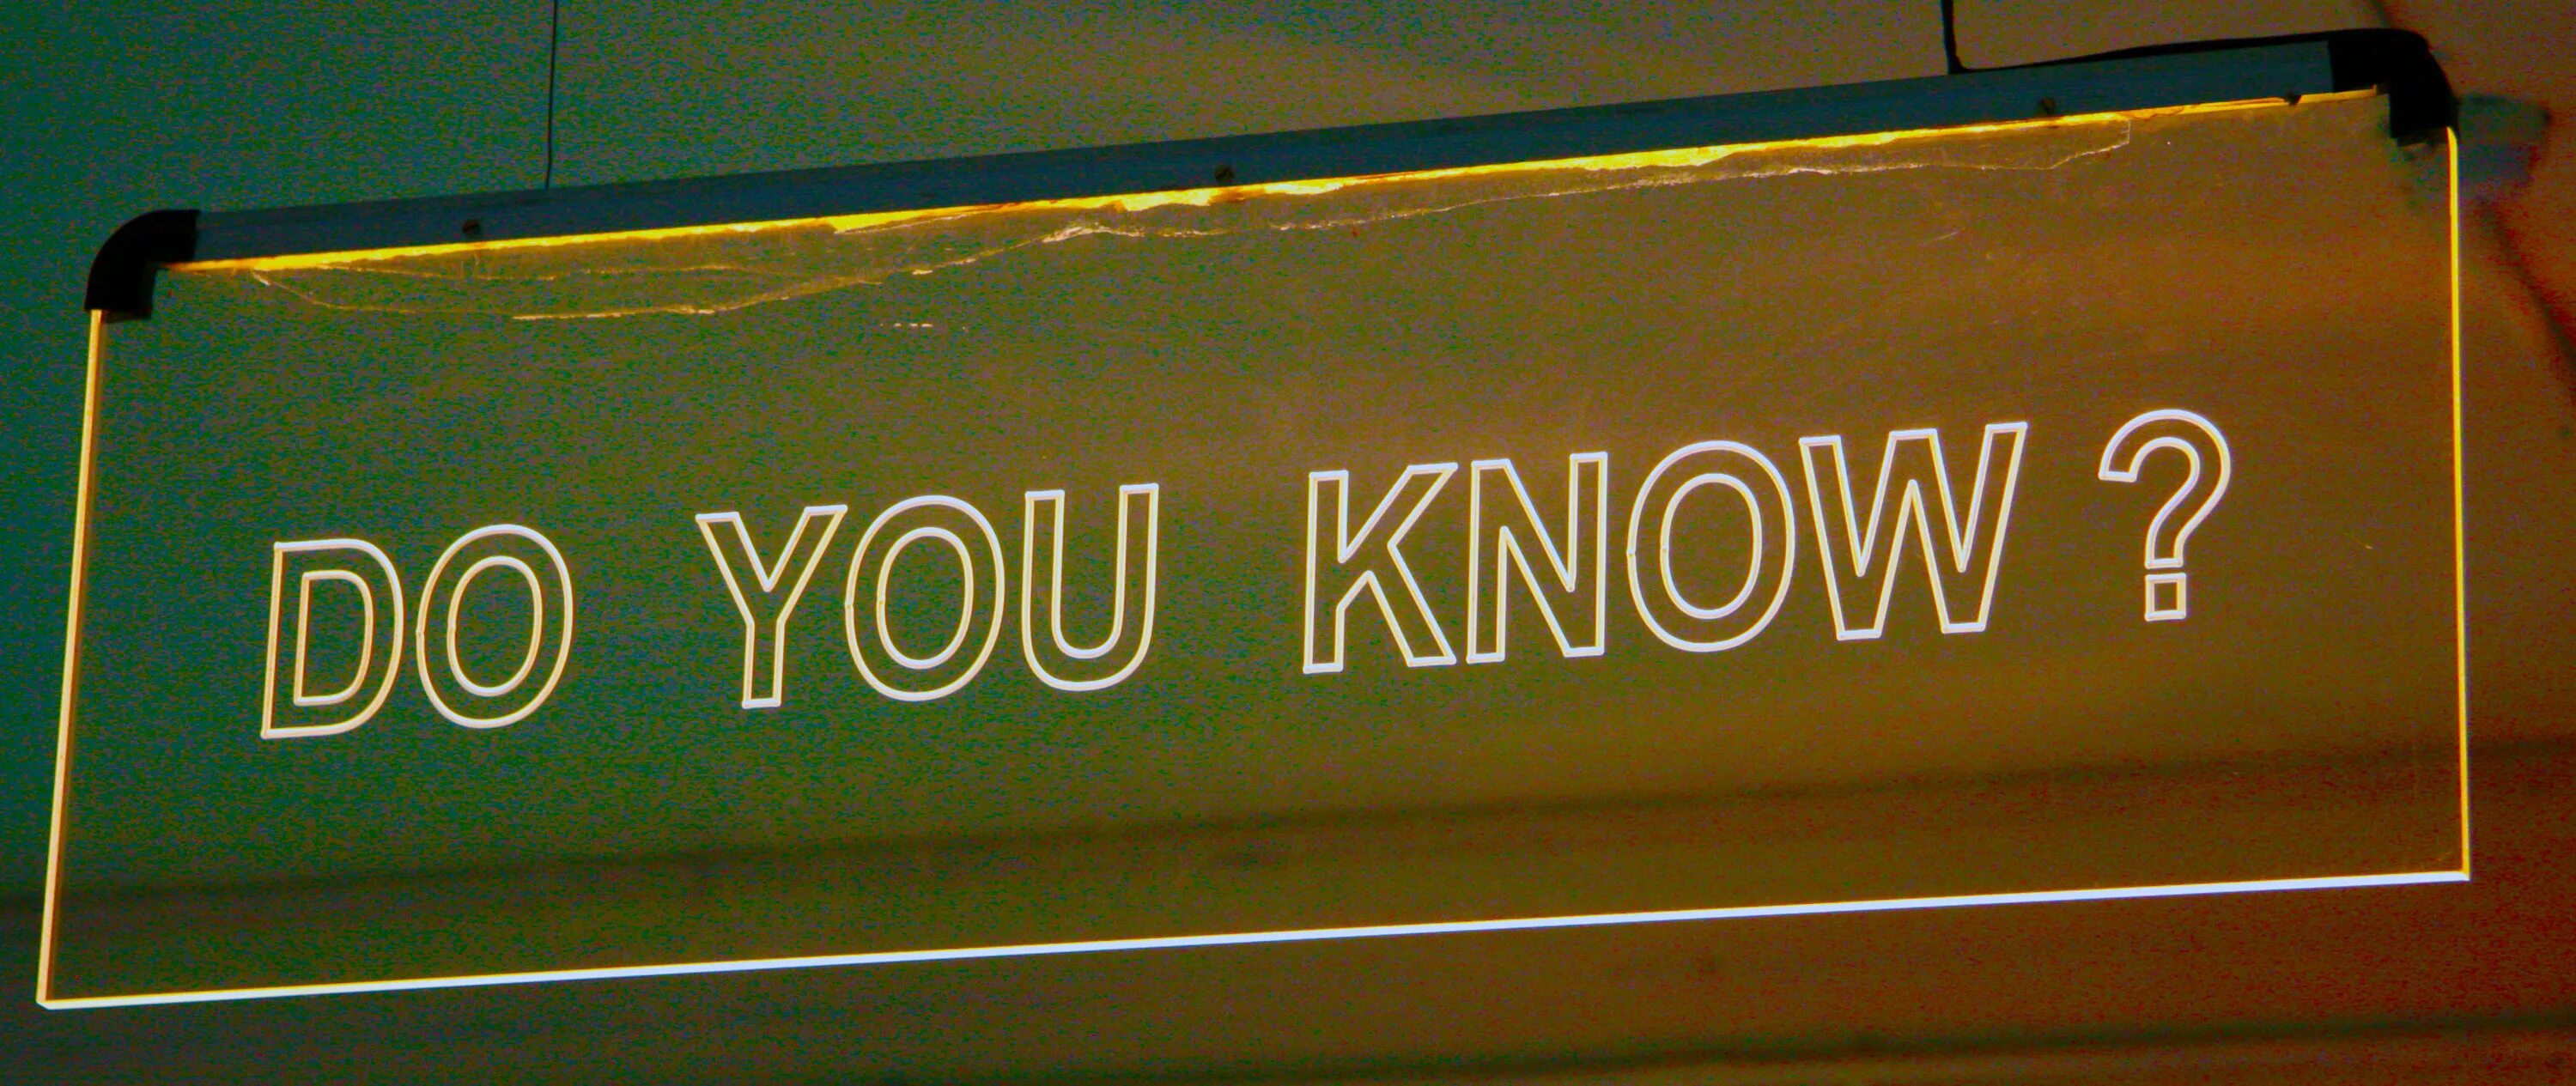 You know. Картинка do you know. Надпись you know. Did you know. When you know you know meaning